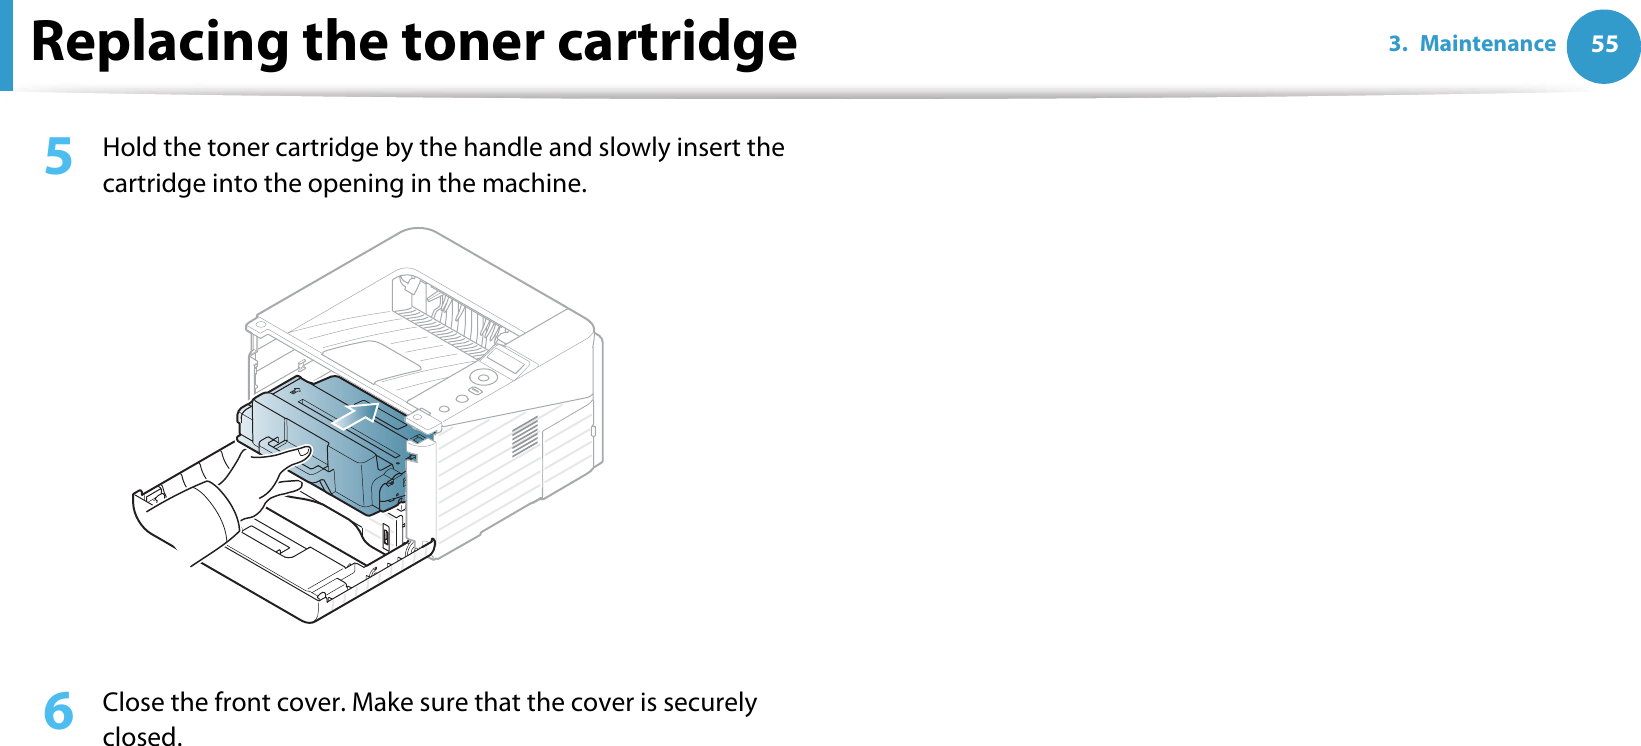 Replacing the toner cartridge 553. Maintenance5  Hold the toner cartridge by the handle and slowly insert the cartridge into the opening in the machine. 6  Close the front cover. Make sure that the cover is securely closed. 